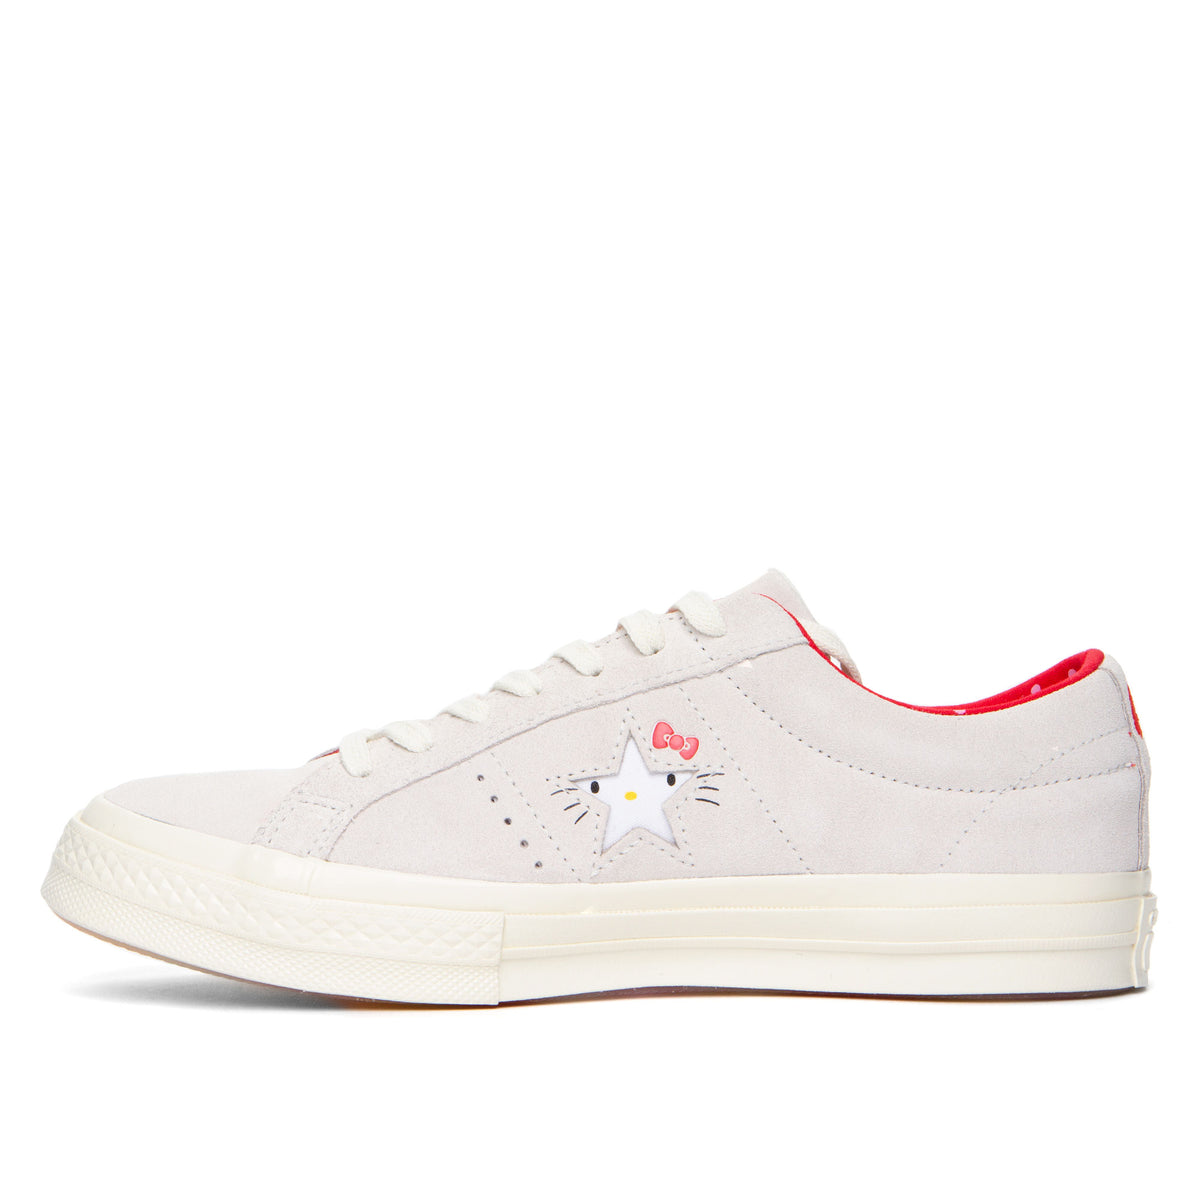 Converse X Hello Kitty One Star Suede